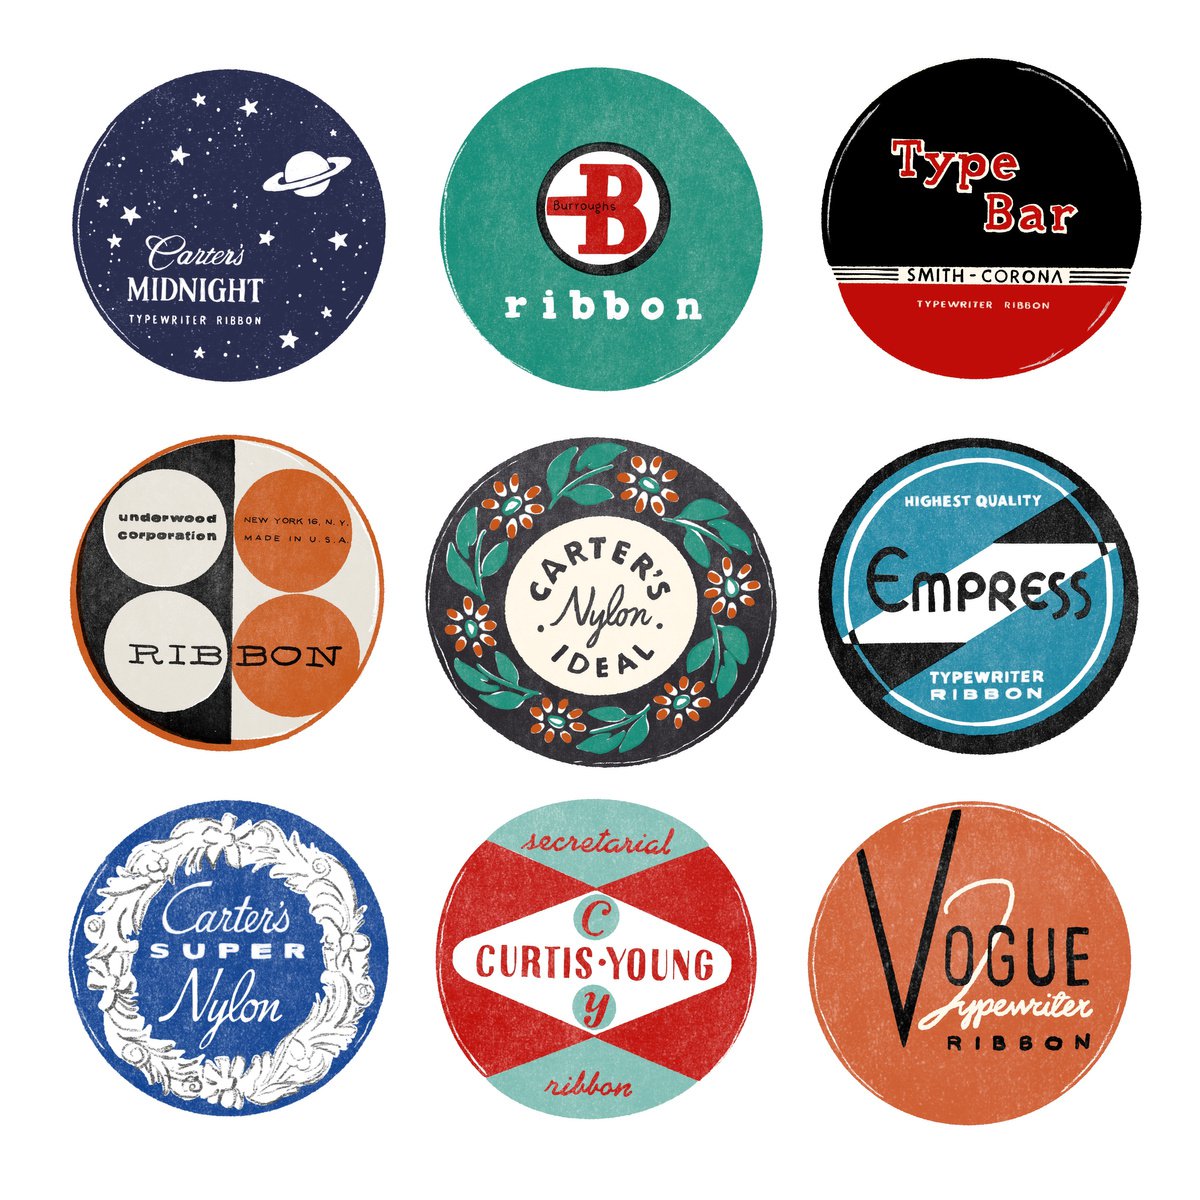 Typewriter Ribbon Tins- limited-edition, giclee print by Design Smith